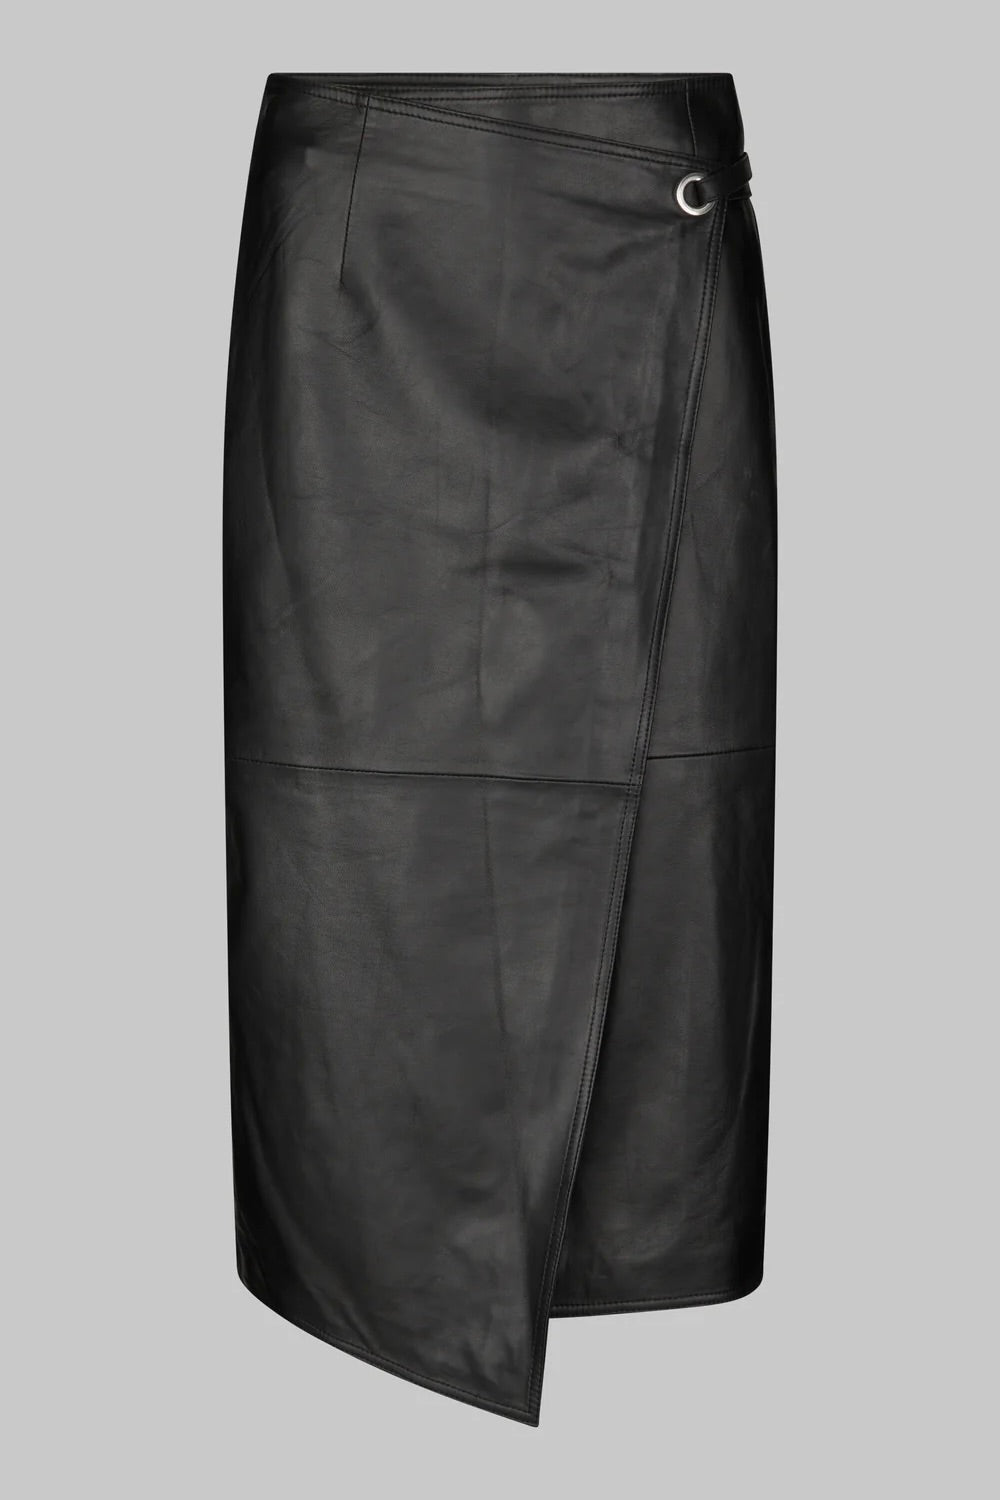 OVAL SQUARE - Reflection Leather Skirt - Dale